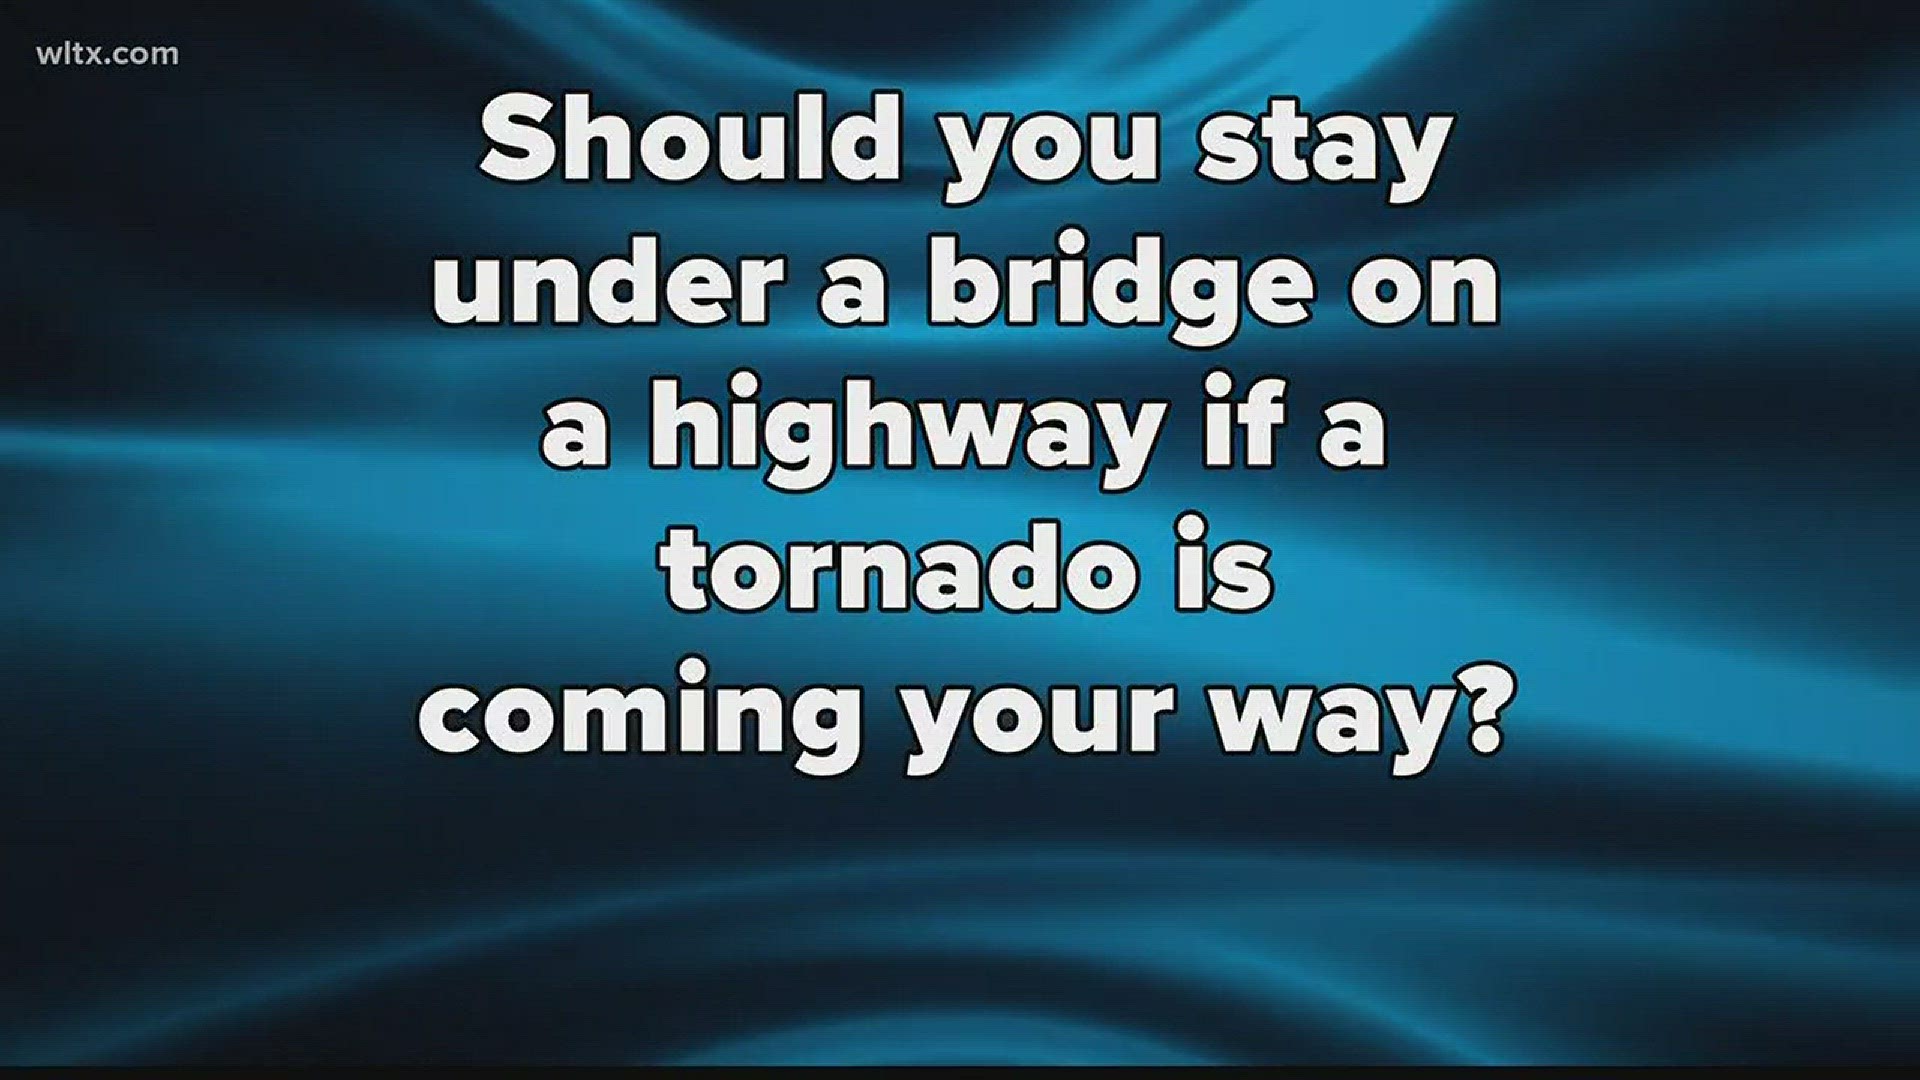 There's no better time to talk about tornado safety than Severe Weather and Flood Safety Week.